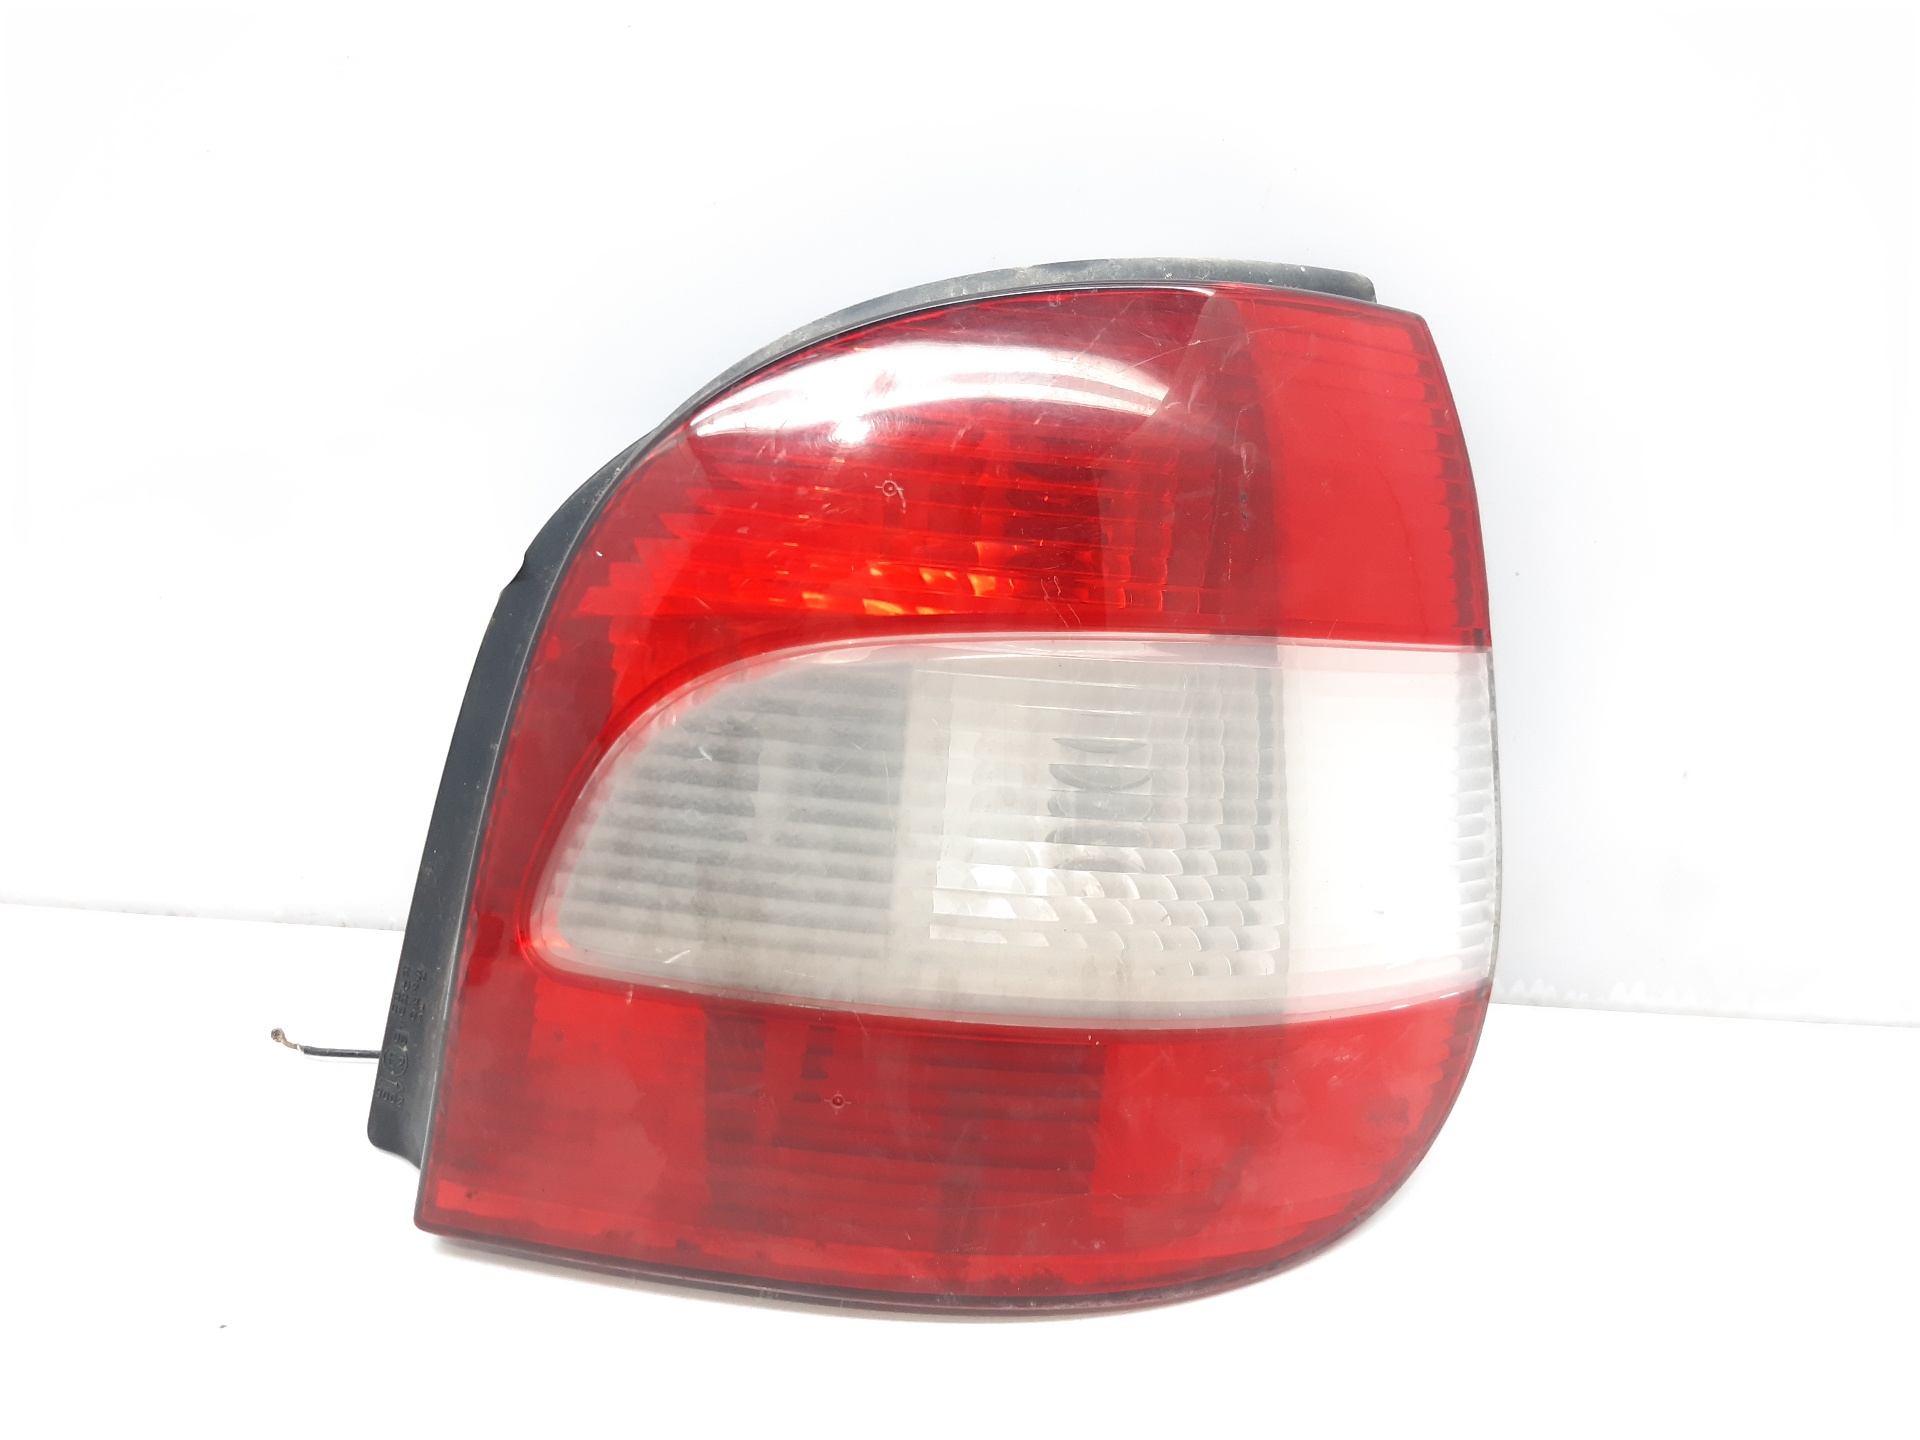 RENAULT Scenic 1 generation (1996-2003) Rear Right Taillight Lamp 7700430966 22460050